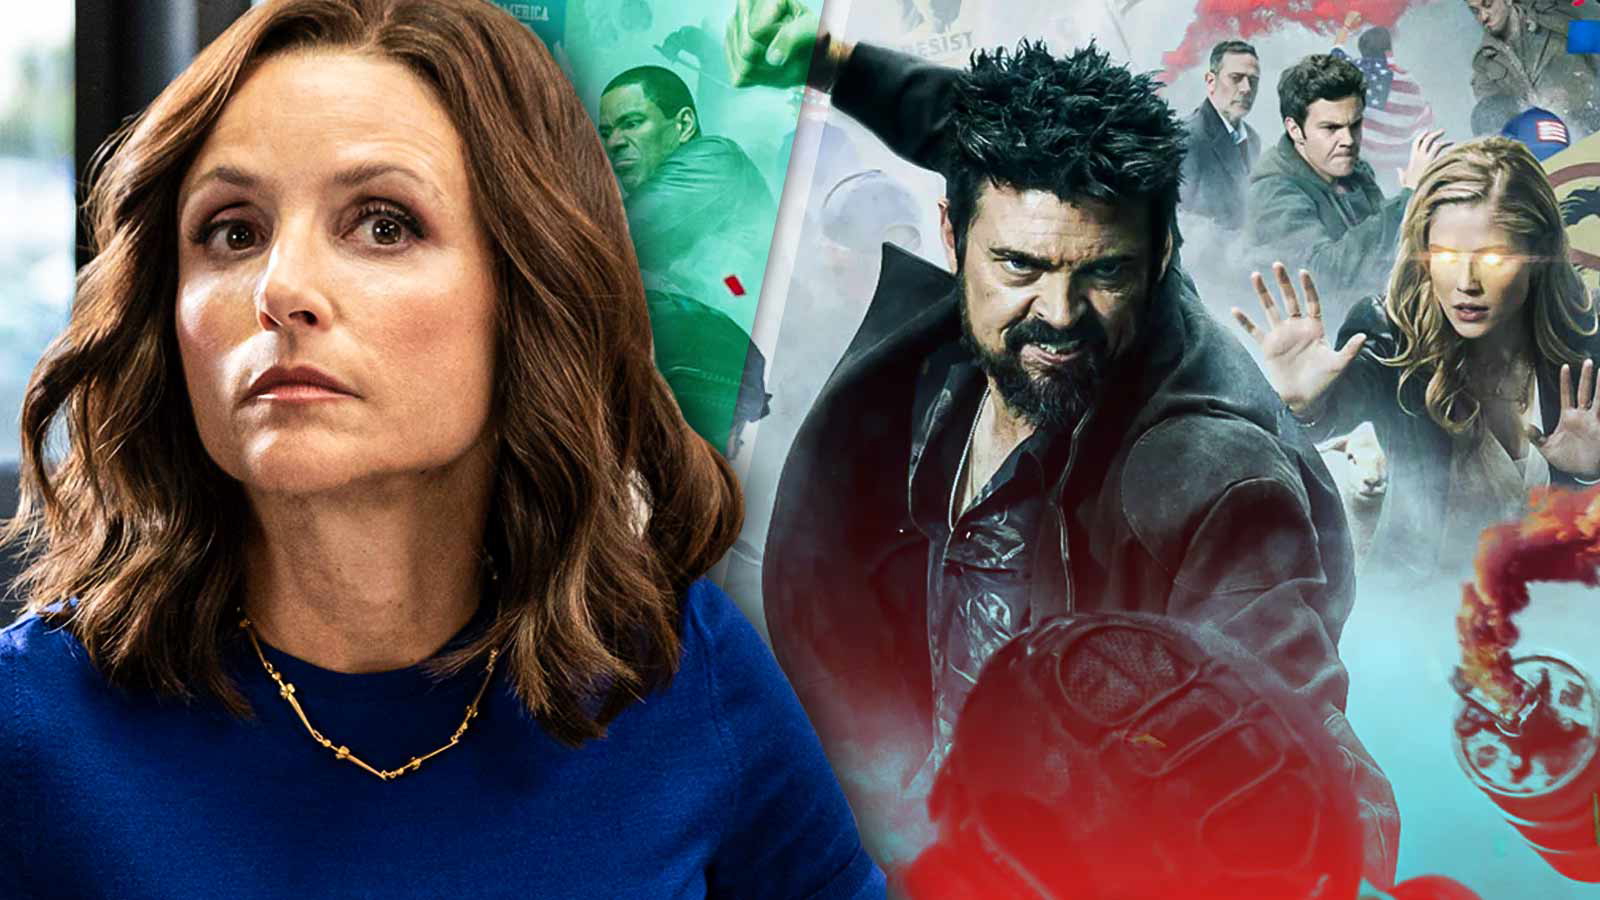 “Politics seems fun again”: Julia Louis-Dreyfus’s ‘Veep’ Pulls a UNO Reverse on ‘The Boys’ as Series Breaks a Record 5 Years After Airing Its Finale